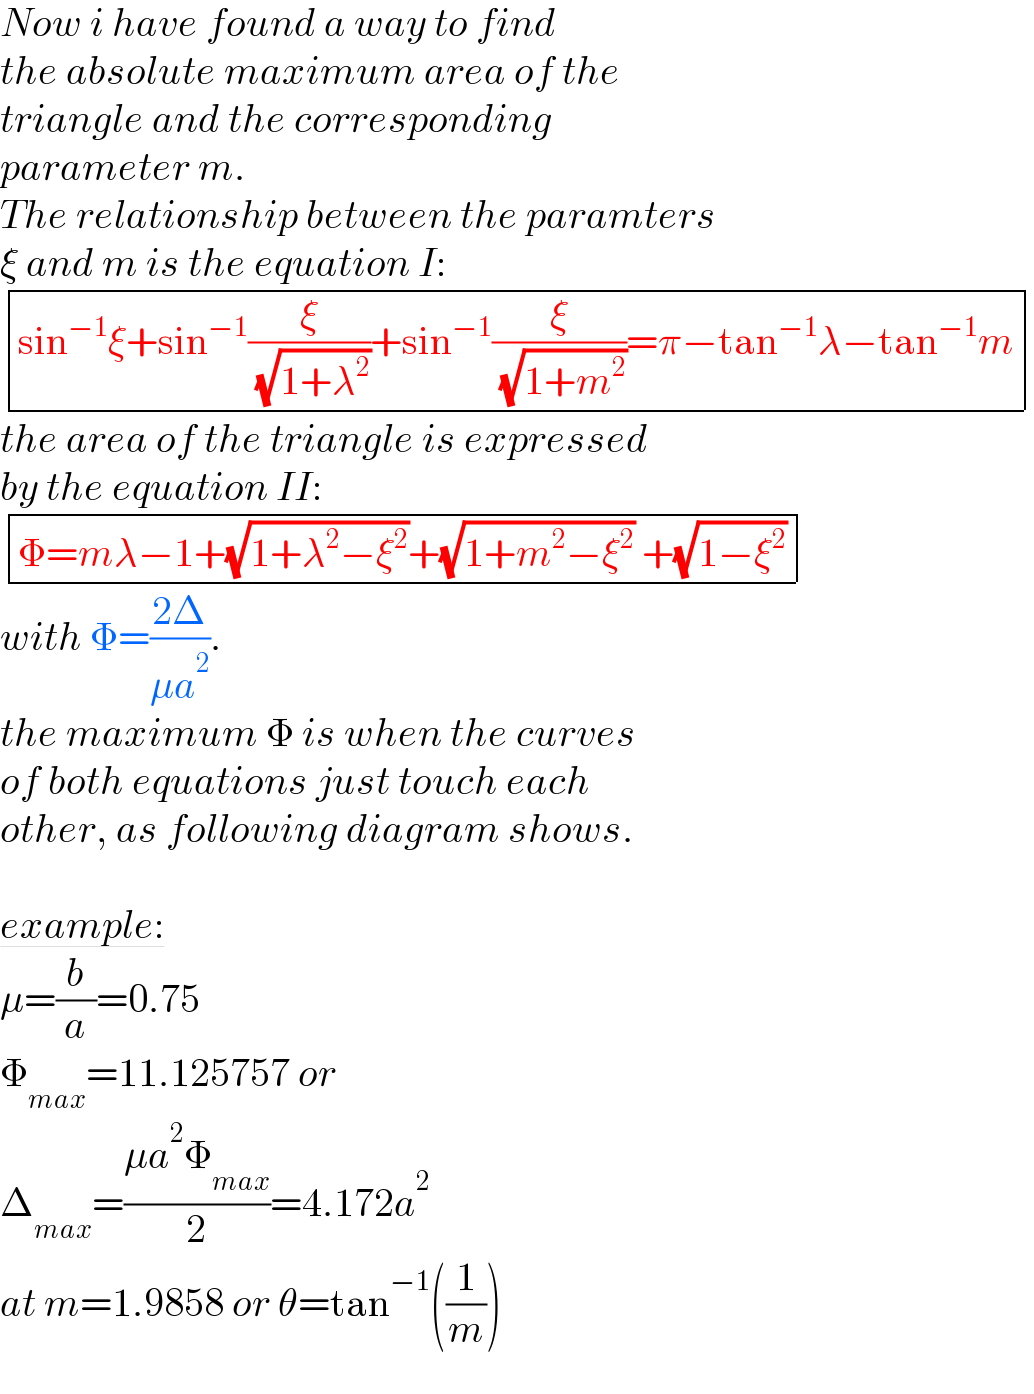 Now i have found a way to find  the absolute maximum area of the  triangle and the corresponding   parameter m.  The relationship between the paramters  ξ and m is the equation I:   determinant (((sin^(−1) ξ+sin^(−1) (ξ/( (√(1+λ^2 ))))+sin^(−1) (ξ/( (√(1+m^2 ))))=π−tan^(−1) λ−tan^(−1) m)))  the area of the triangle is expressed  by the equation II:   determinant (((Φ=mλ−1+(√(1+λ^2 −ξ^2 ))+(√(1+m^2 −ξ^2 )) +(√(1−ξ^2 )))))  with Φ=((2Δ)/(μa^2 )).  the maximum Φ is when the curves  of both equations just touch each  other, as following diagram shows.    example:  μ=(b/a)=0.75  Φ_(max) =11.125757 or   Δ_(max) =((μa^2 Φ_(max) )/2)=4.172a^2   at m=1.9858 or θ=tan^(−1) ((1/m))  